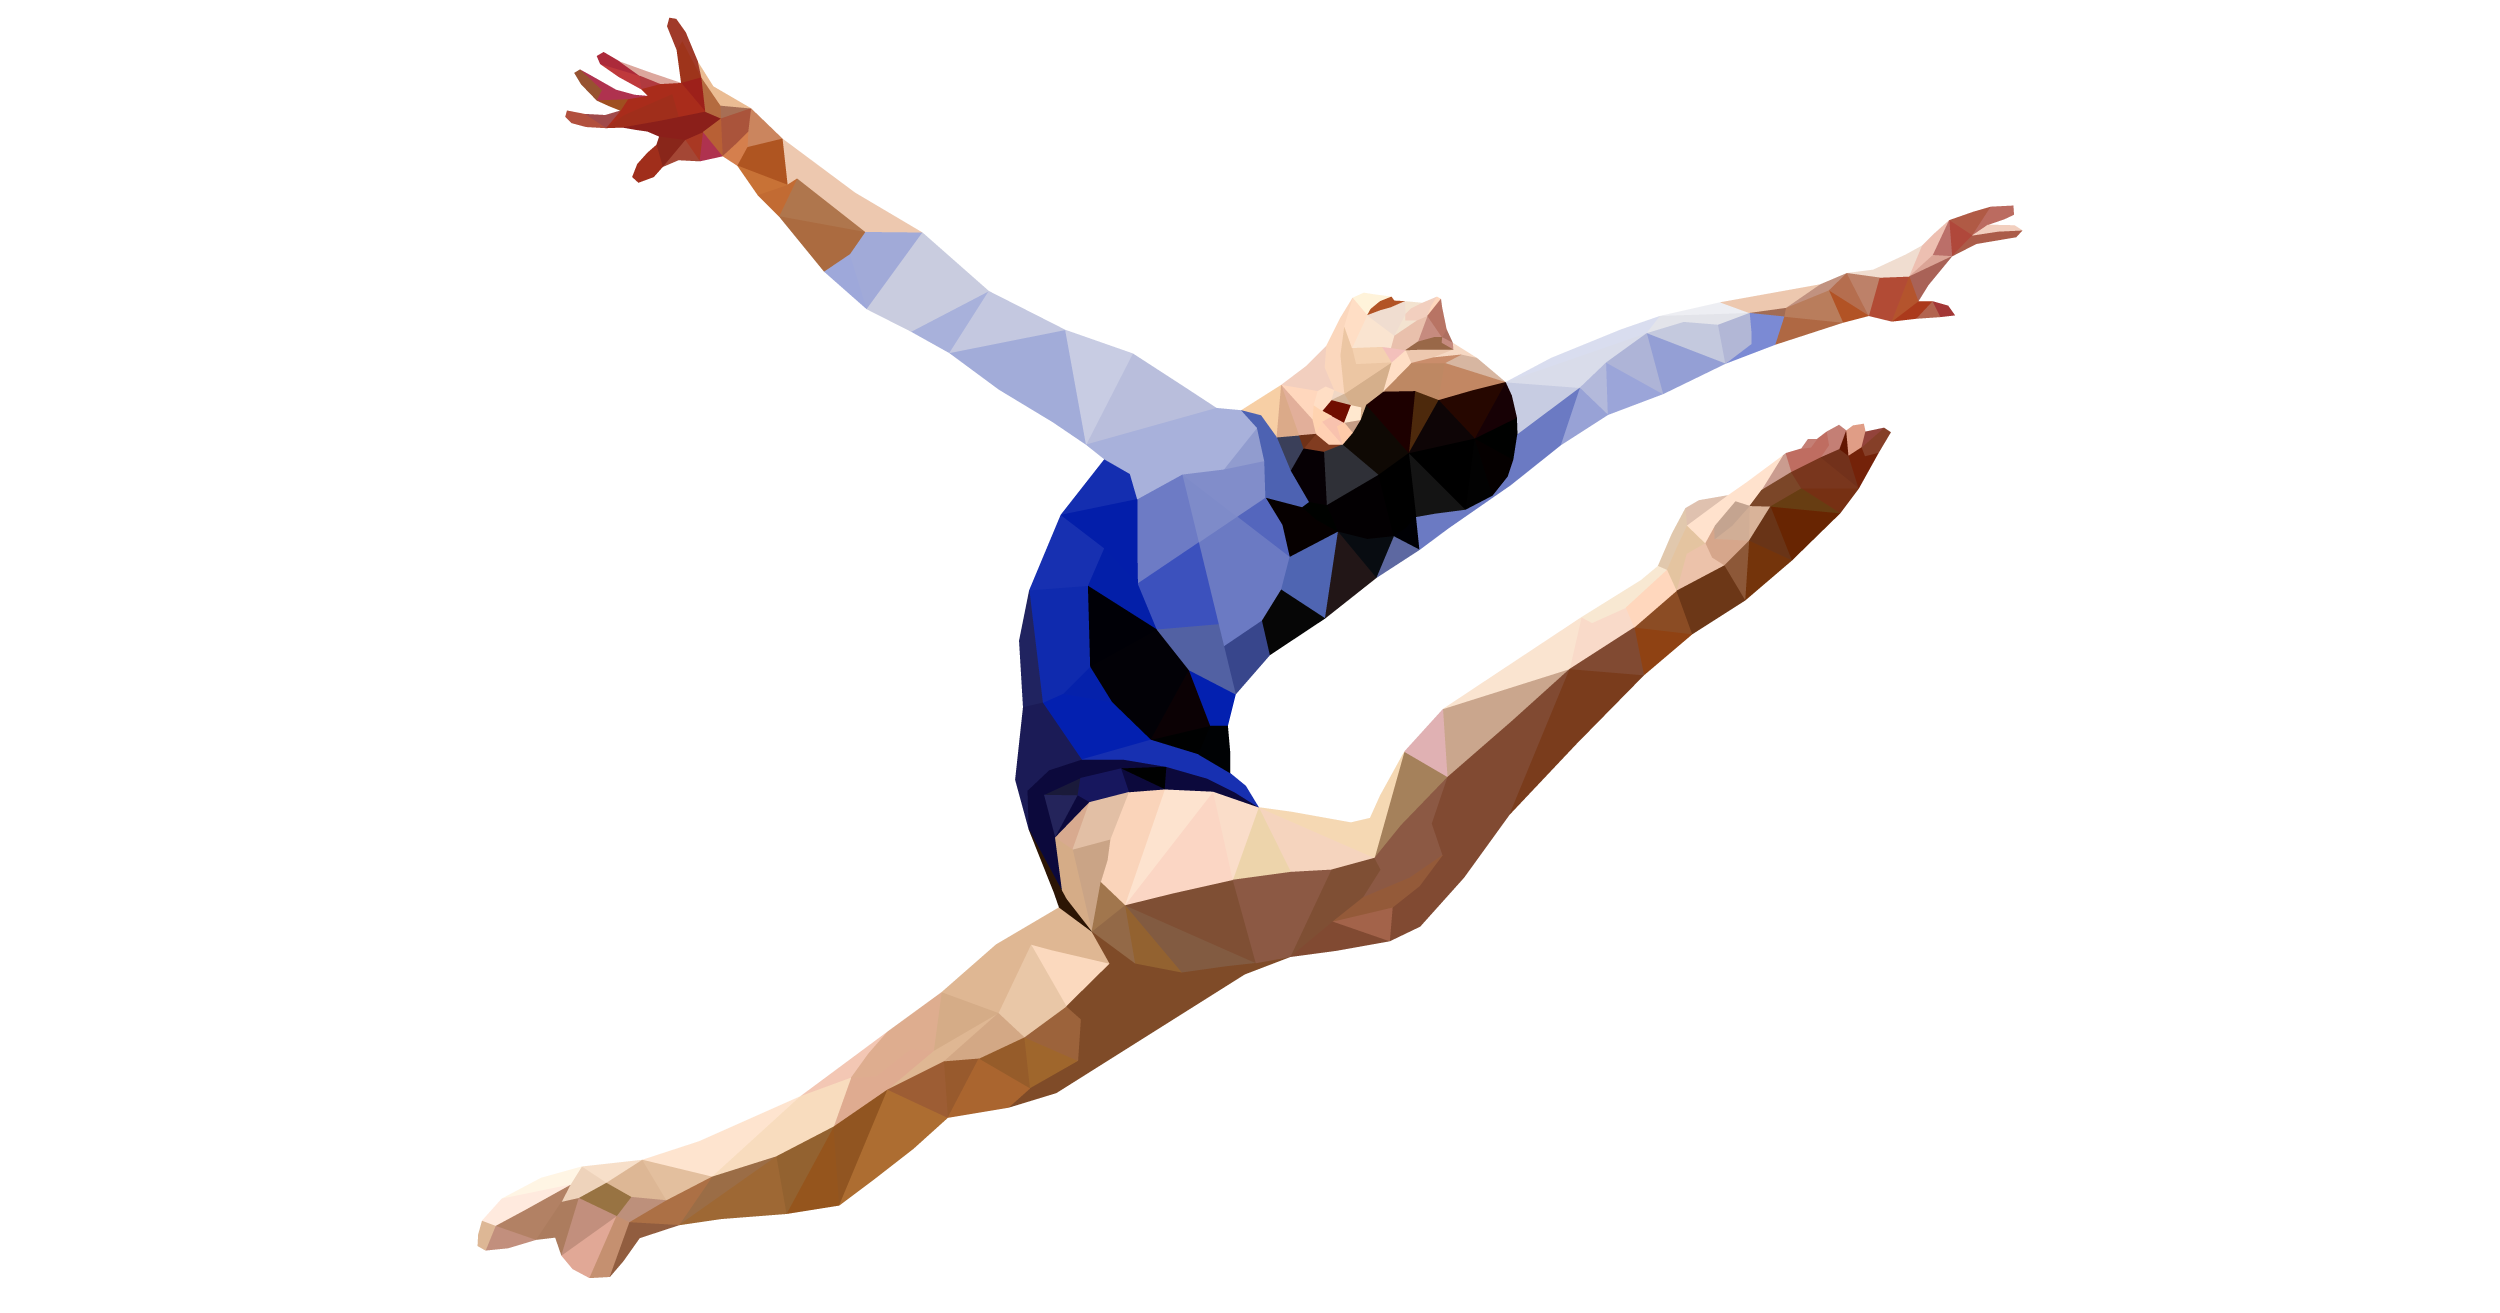 A photo illustration of a female leaping into the air while participating in acrobatics.